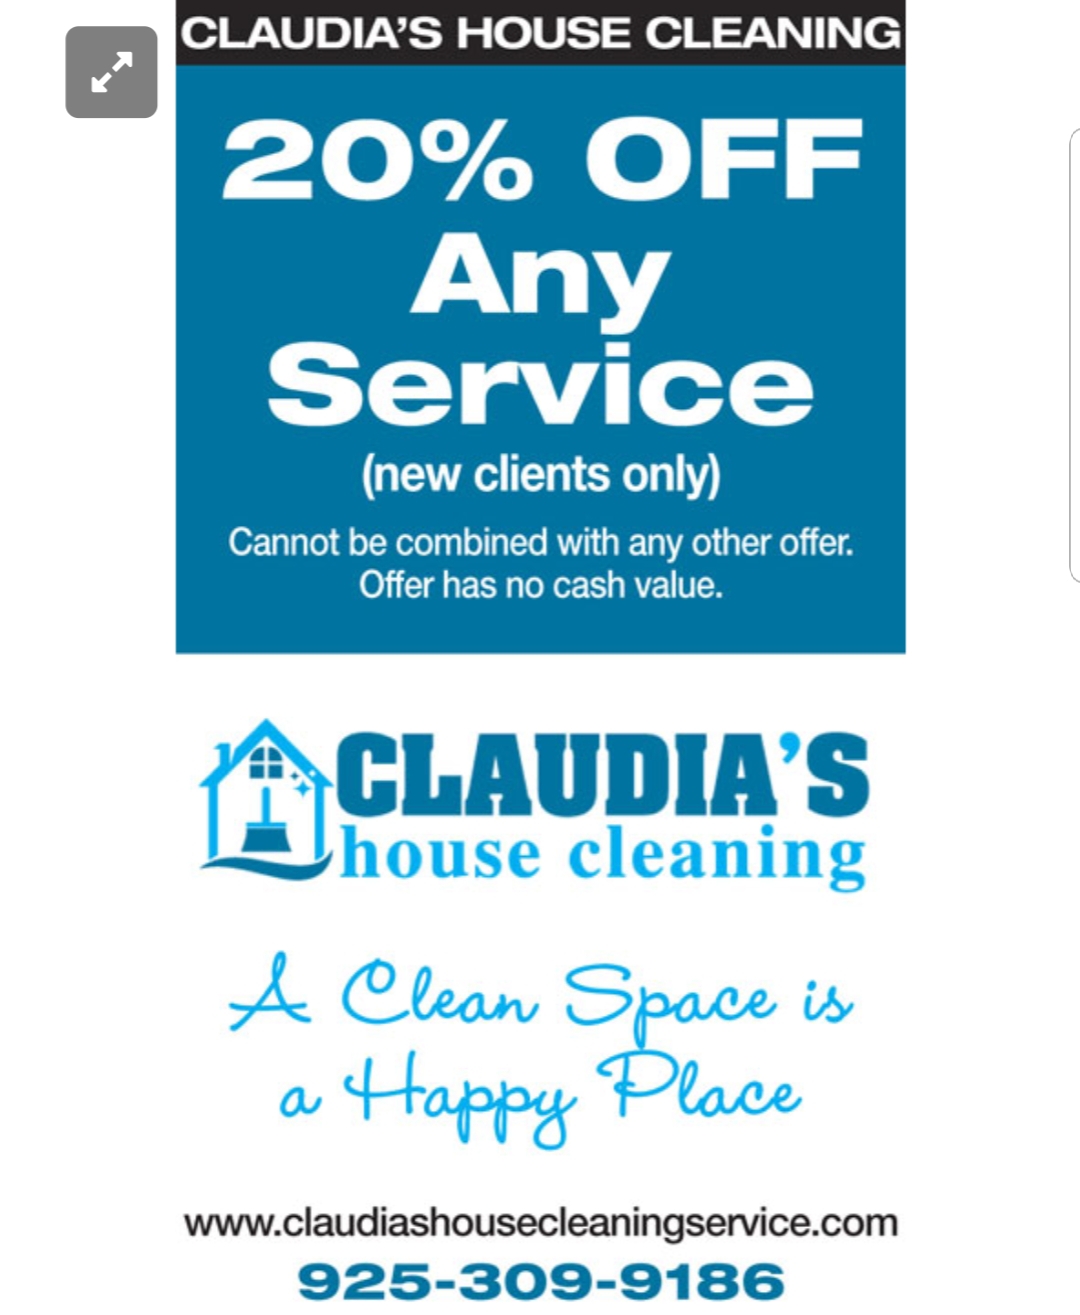 Claudia House Cleaning